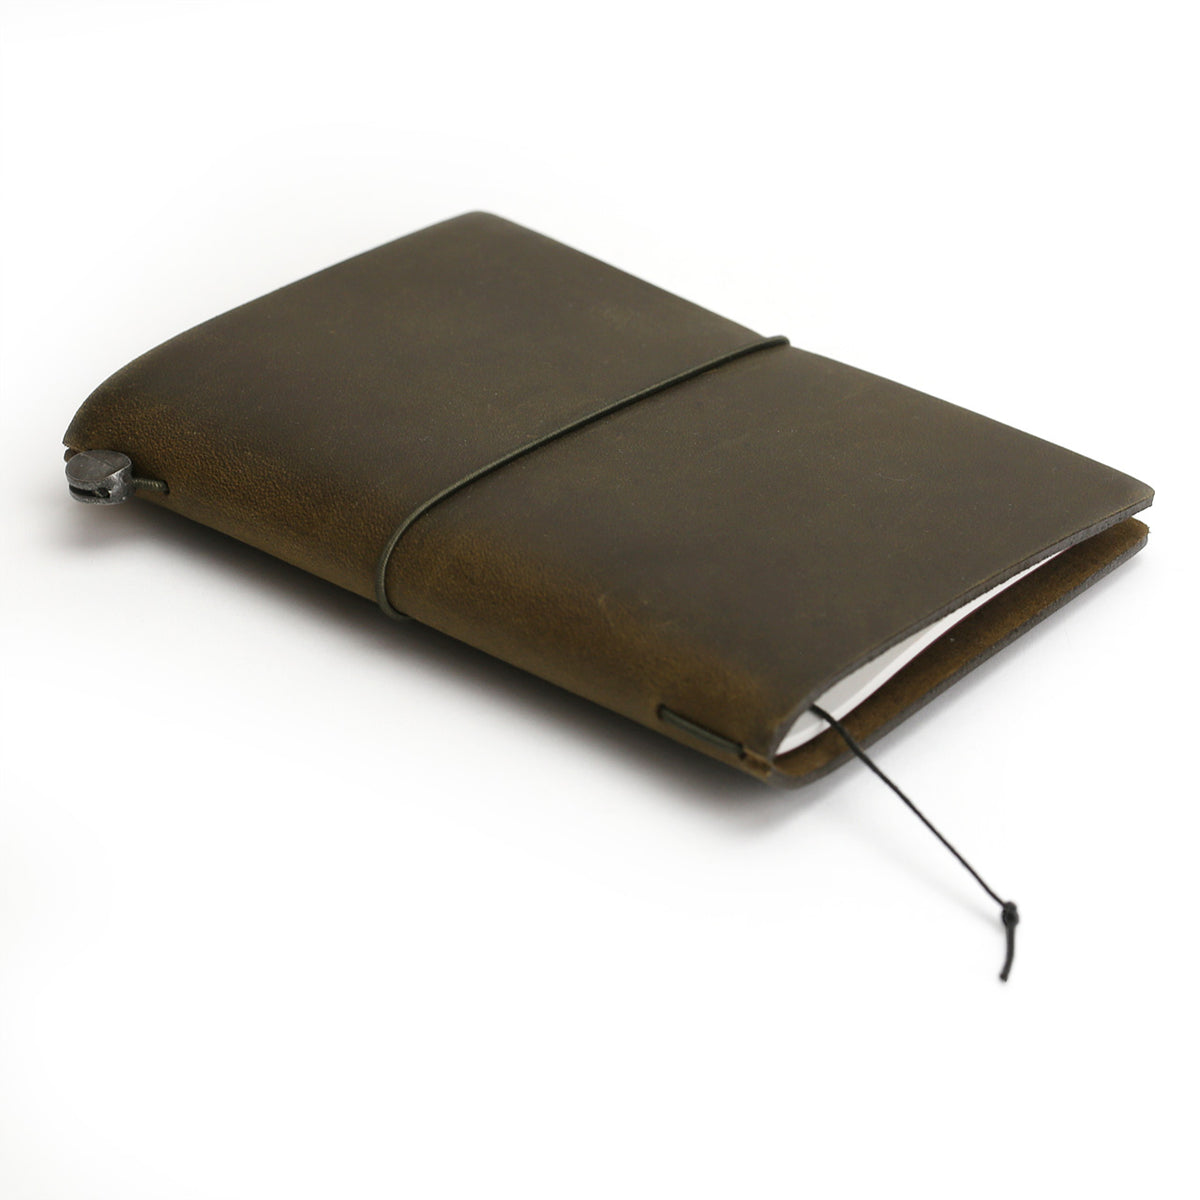 Olive Passport sized notebook cover, three-quarter angle